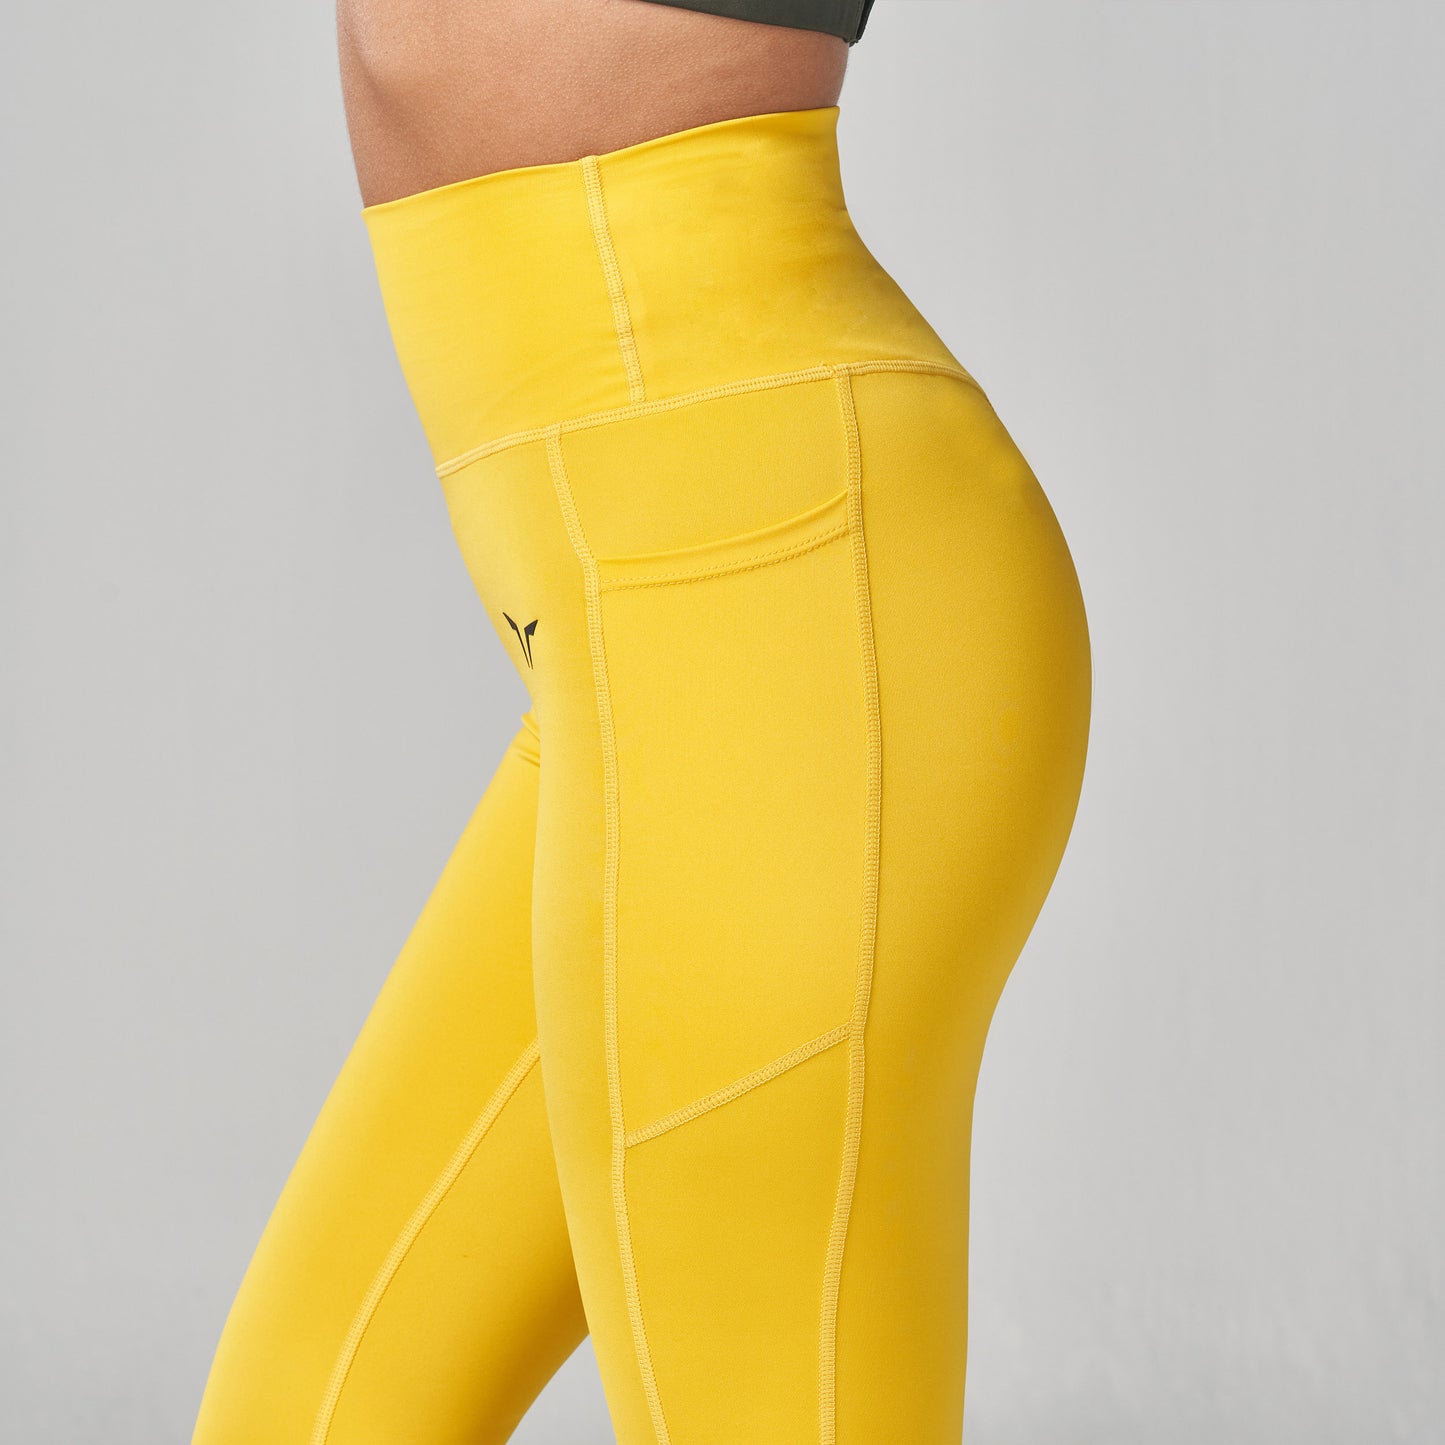 squatwolf-workout-clothes-essential-cropped-leggings-yellow-leggings-for-women